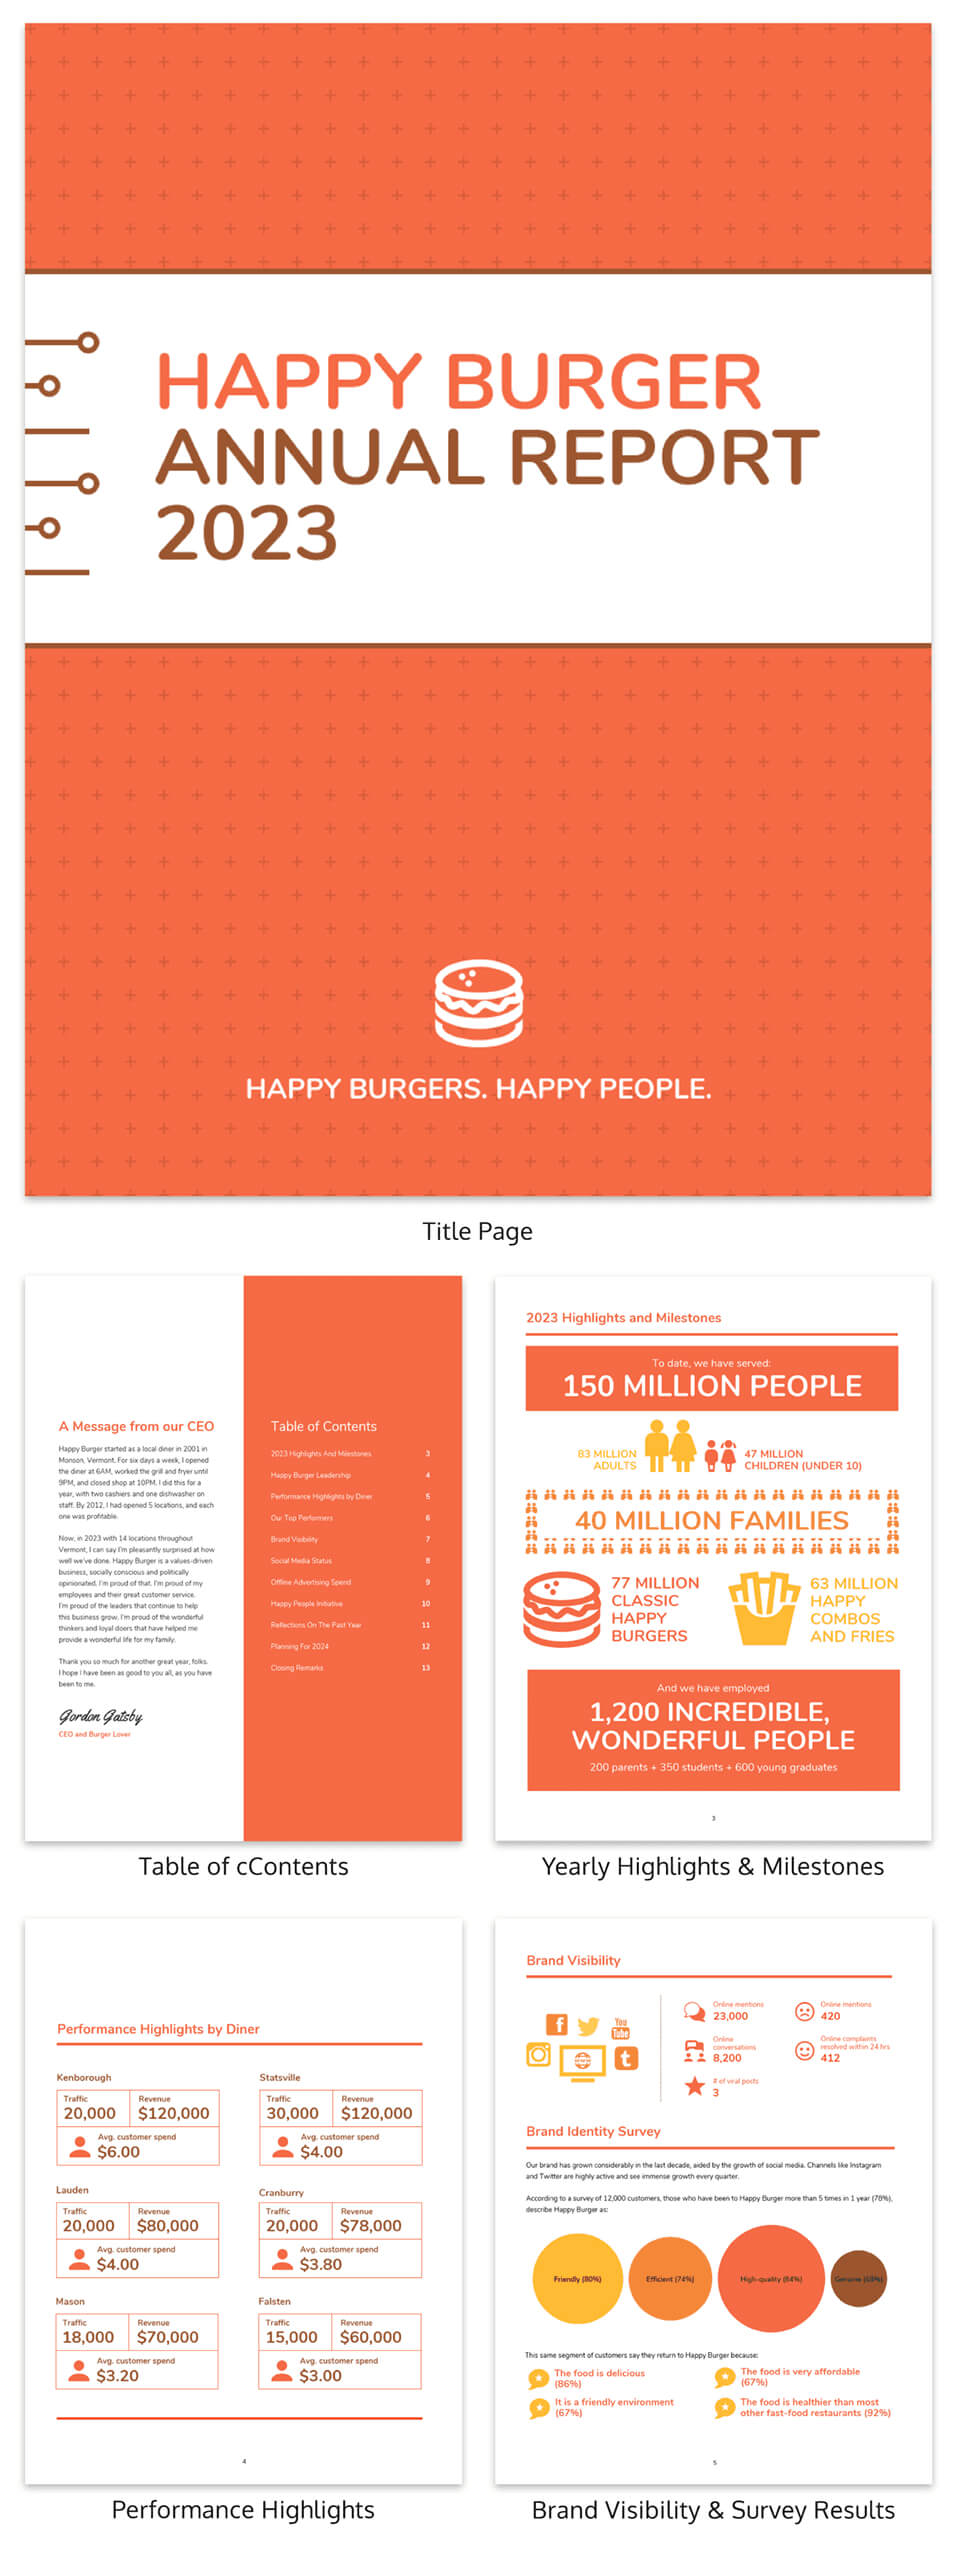 55+ Customizable Annual Report Design Templates, Examples & Tips Inside Wrap Up Report Template